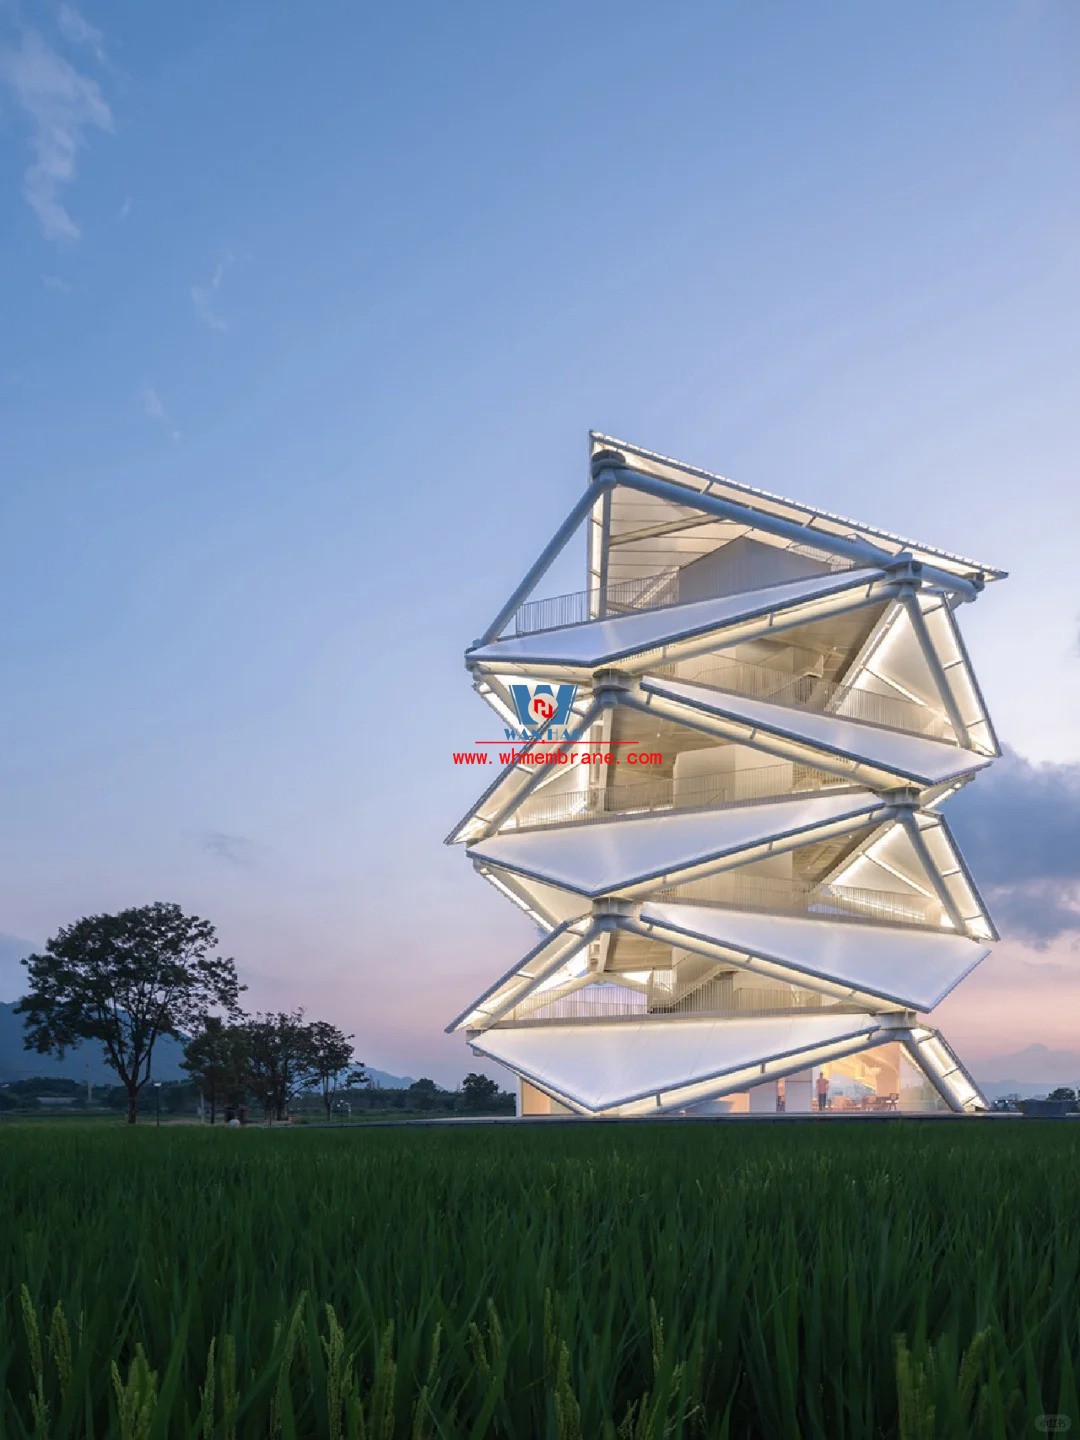 A steel film structure with creativity and artistic beauty